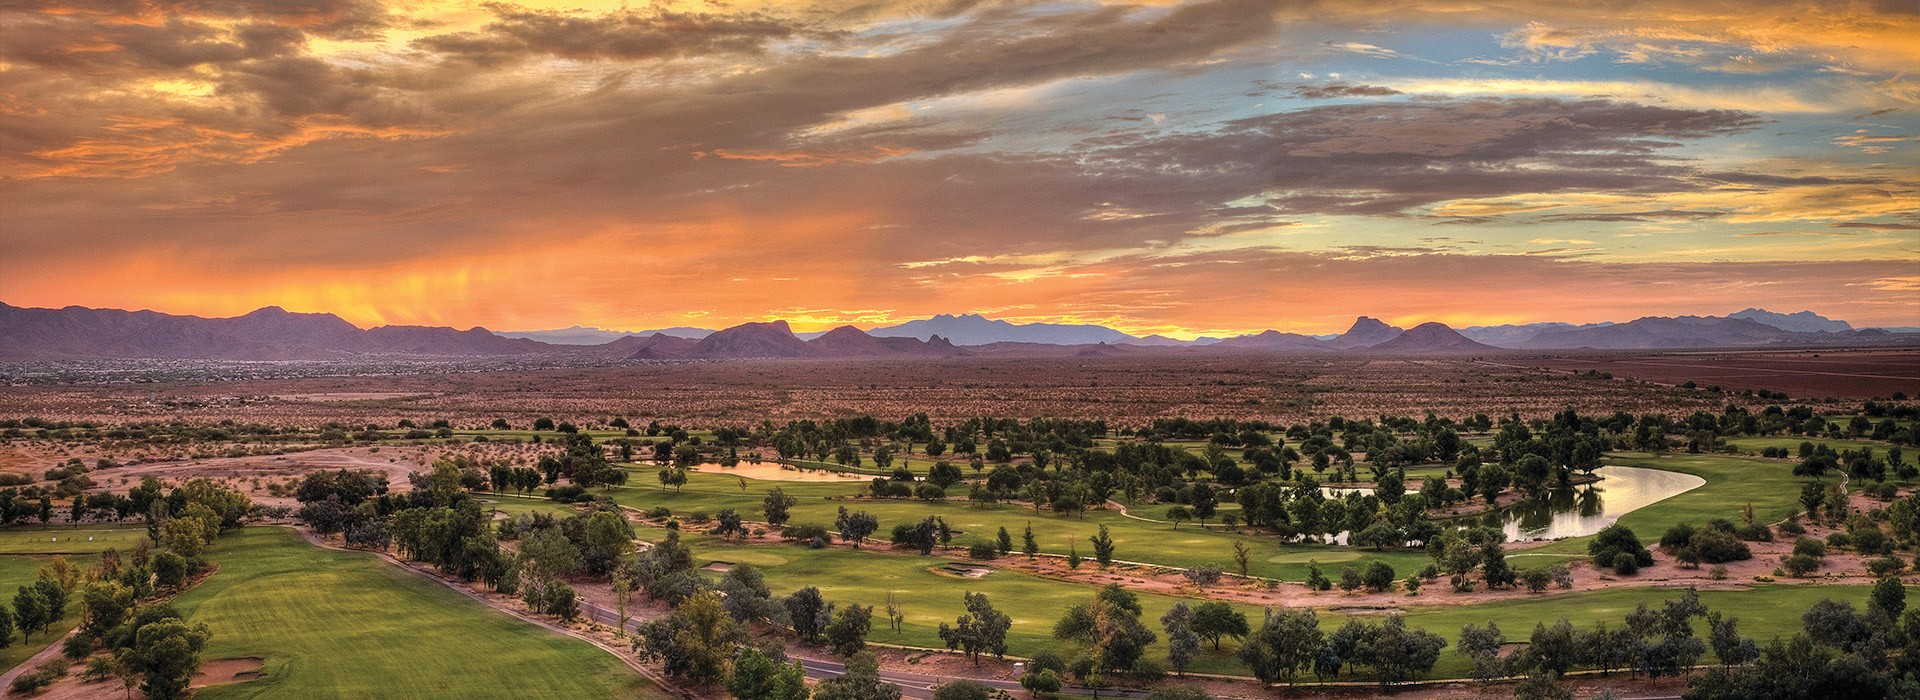 Get Your Free Salt River Visitor Guide Now